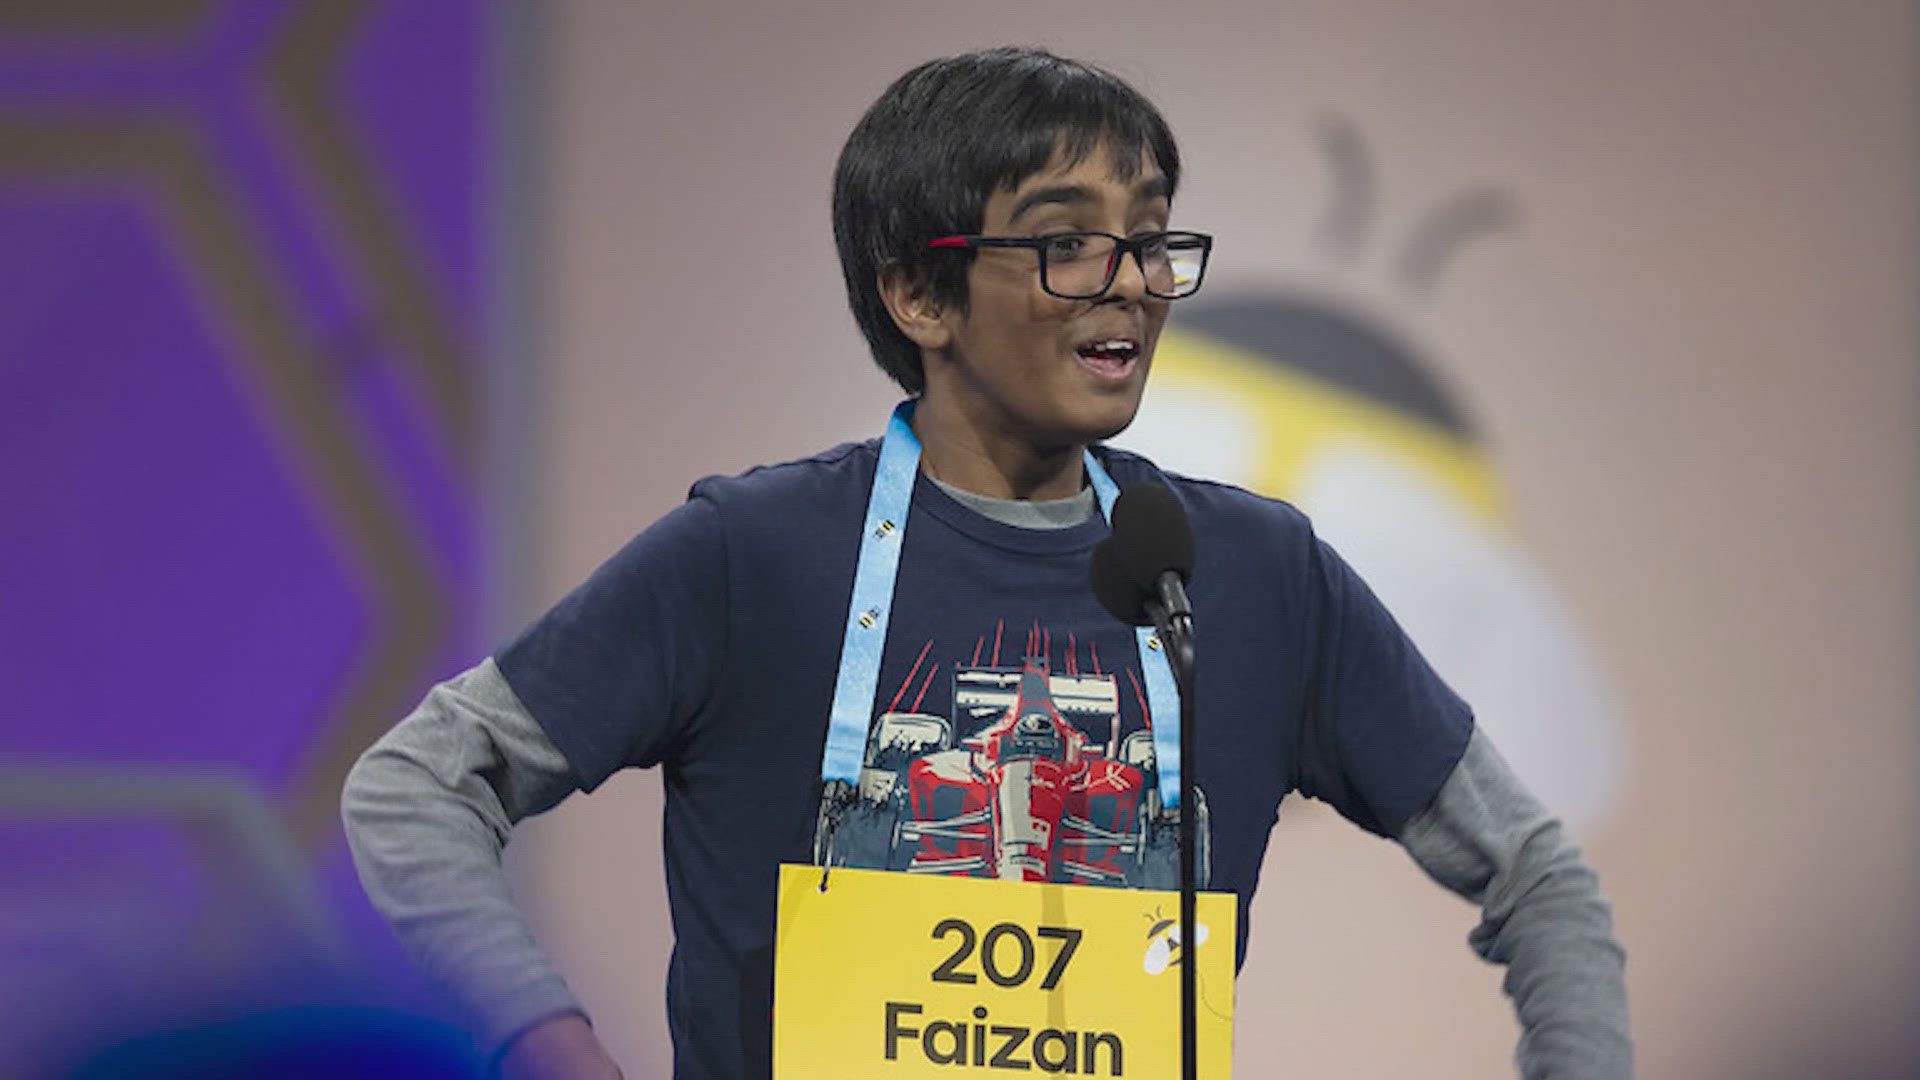 Faizan Zaki didn't even take one day off after returning home from the Scripps Spelling Bee. His goal is to learn 4,000 words a day during the summer.